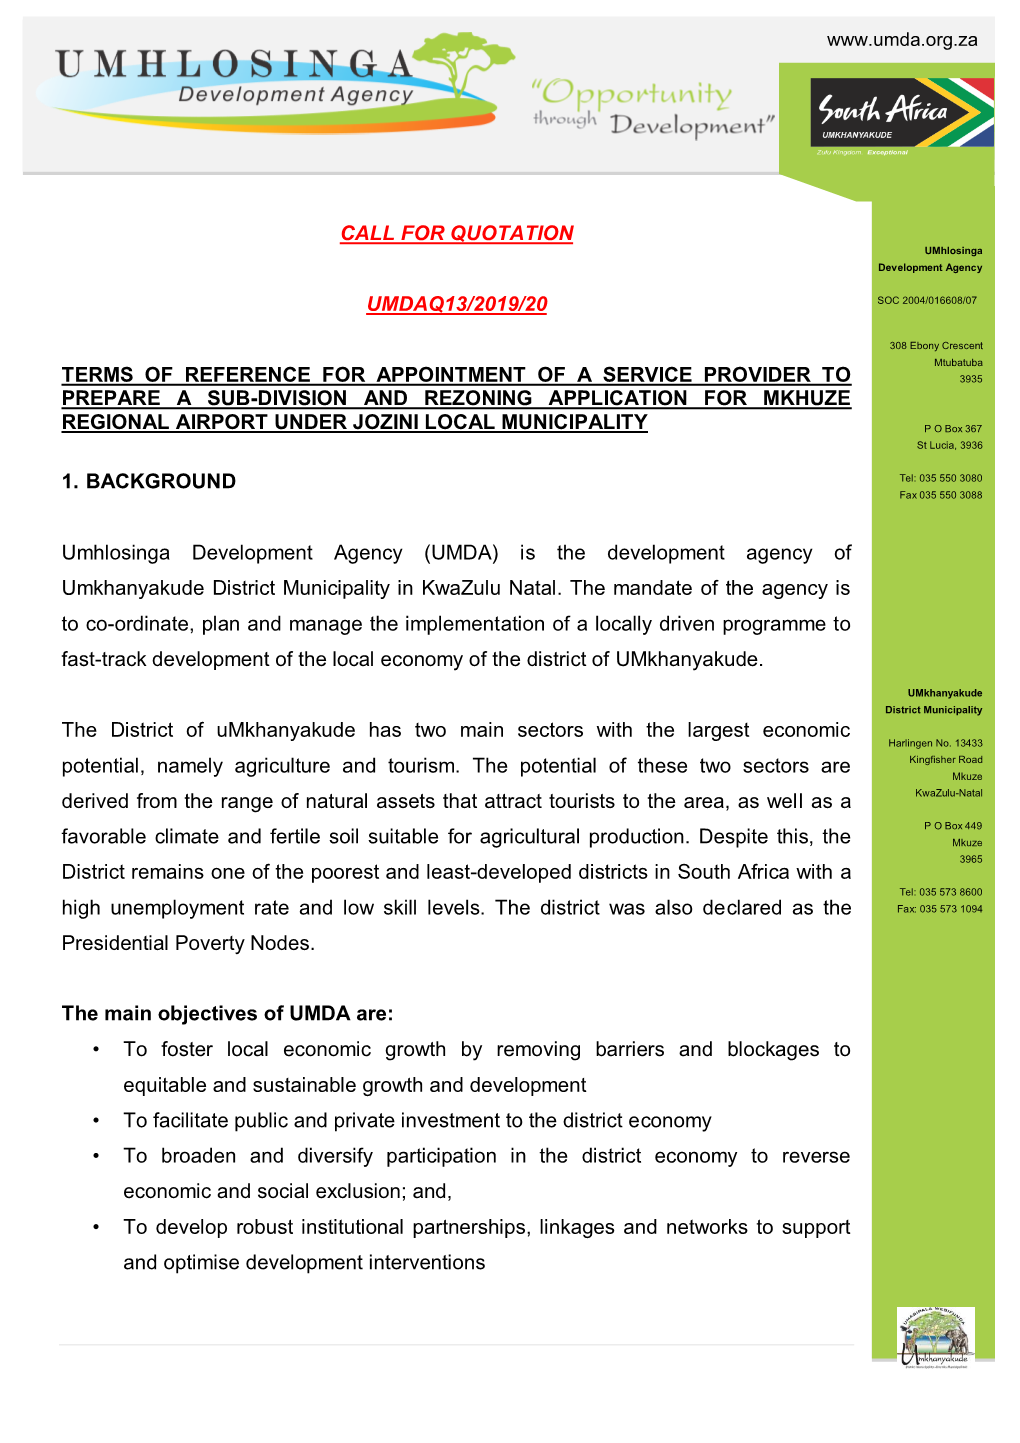 Call for Quotation Umdaq13/2019/20 Terms Of